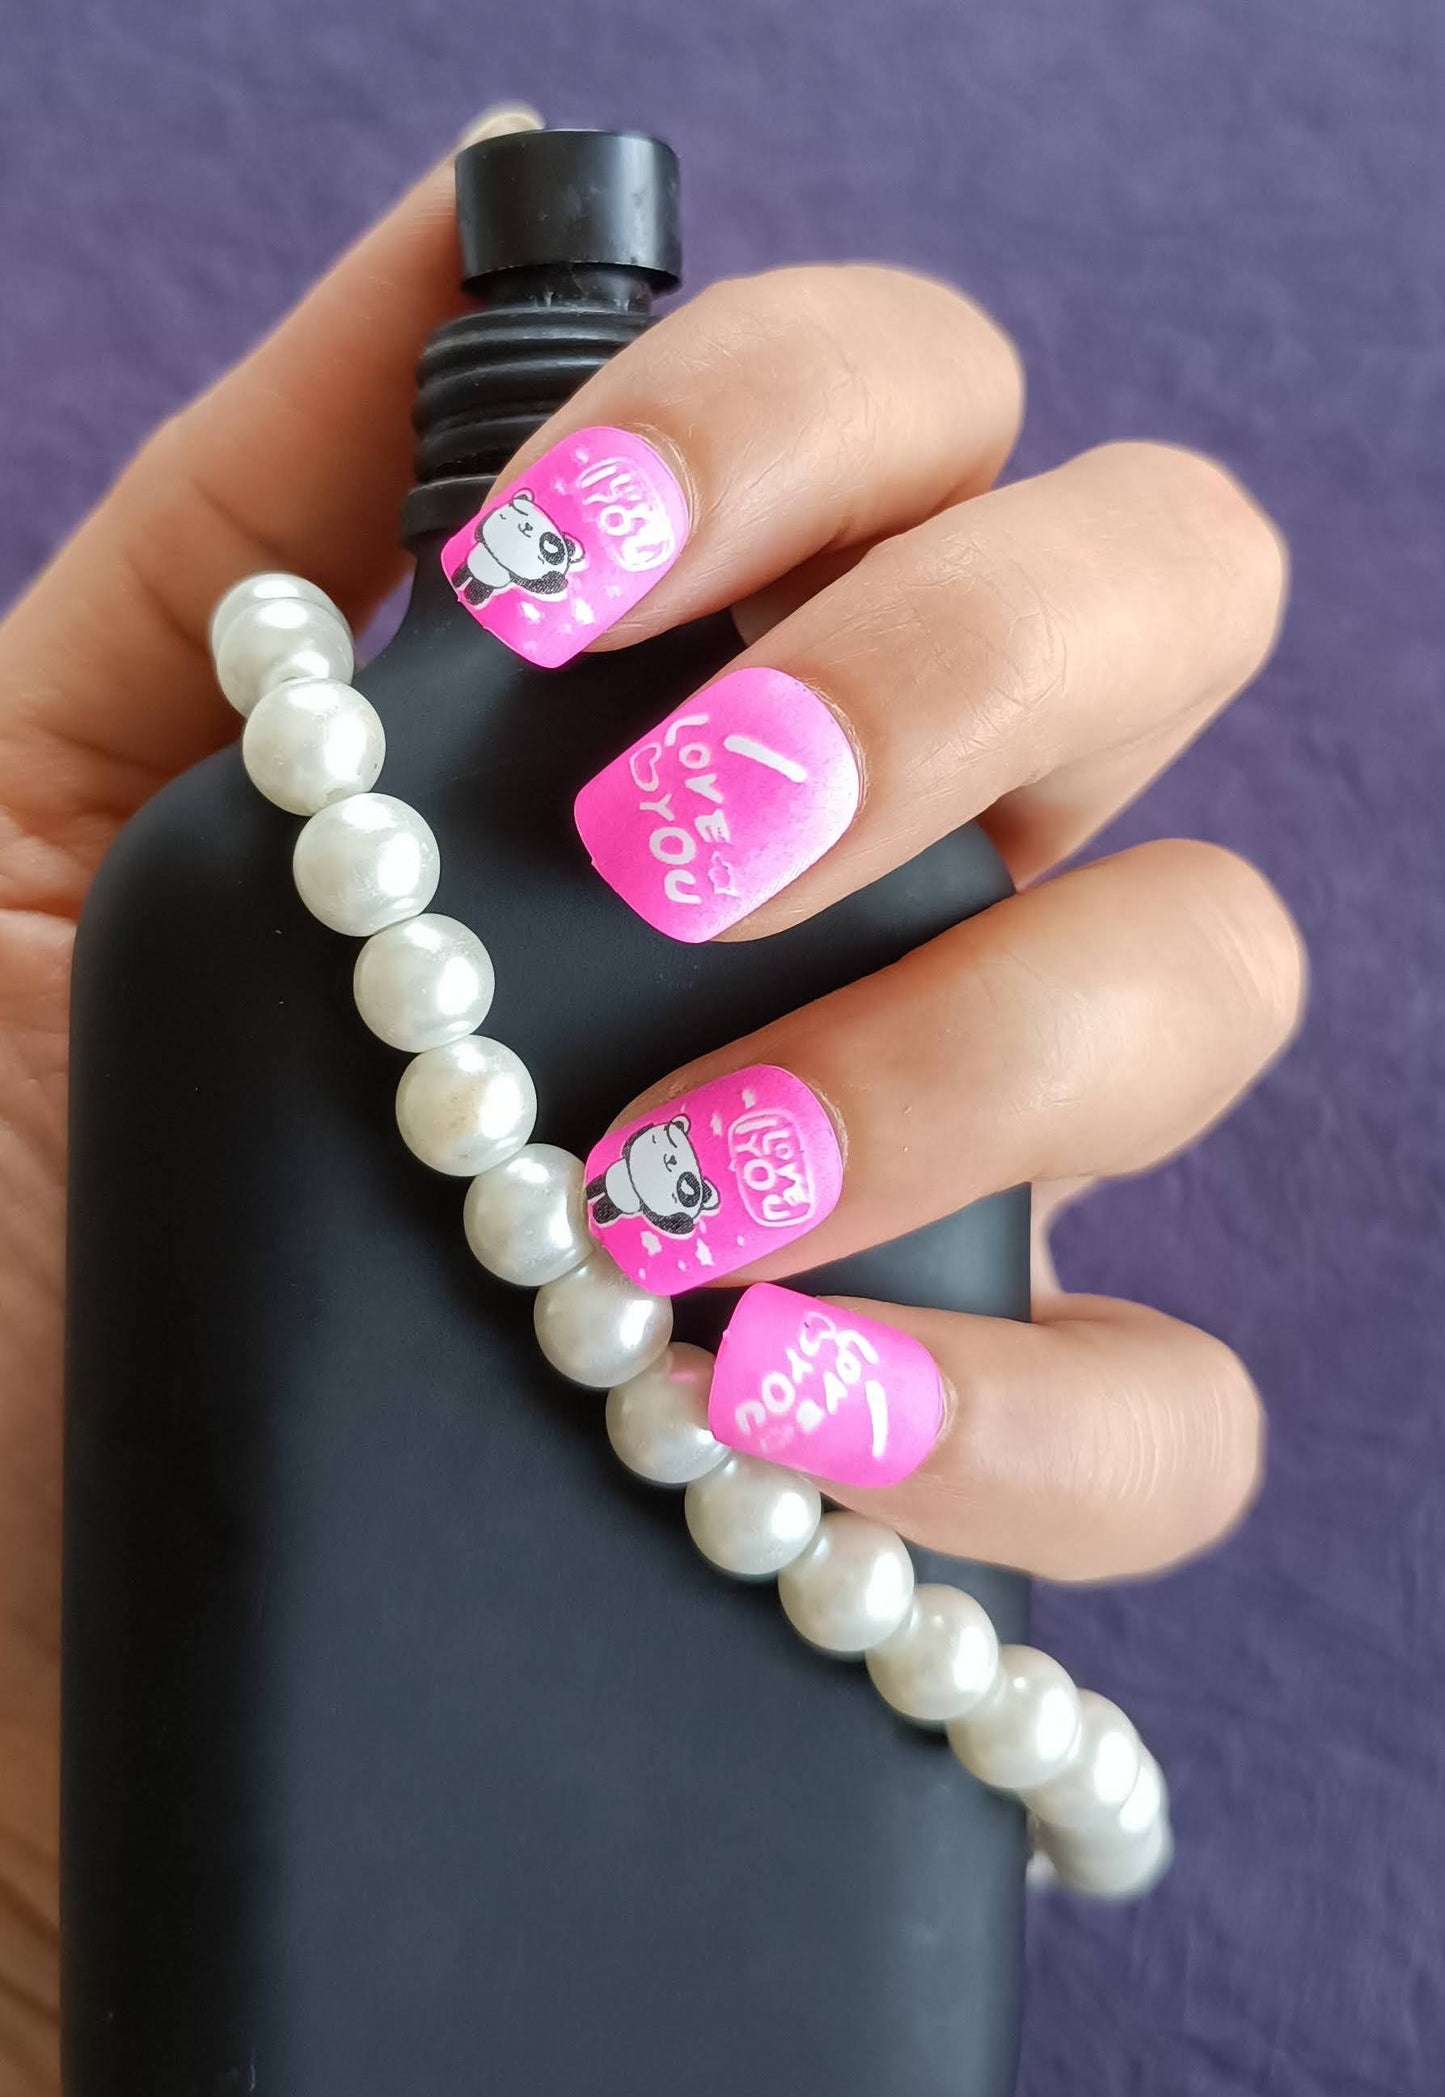 Acrylic/ Press-on Designer Nails with Glue Tabs | Artificial Nails Under 50  - Pink Panda